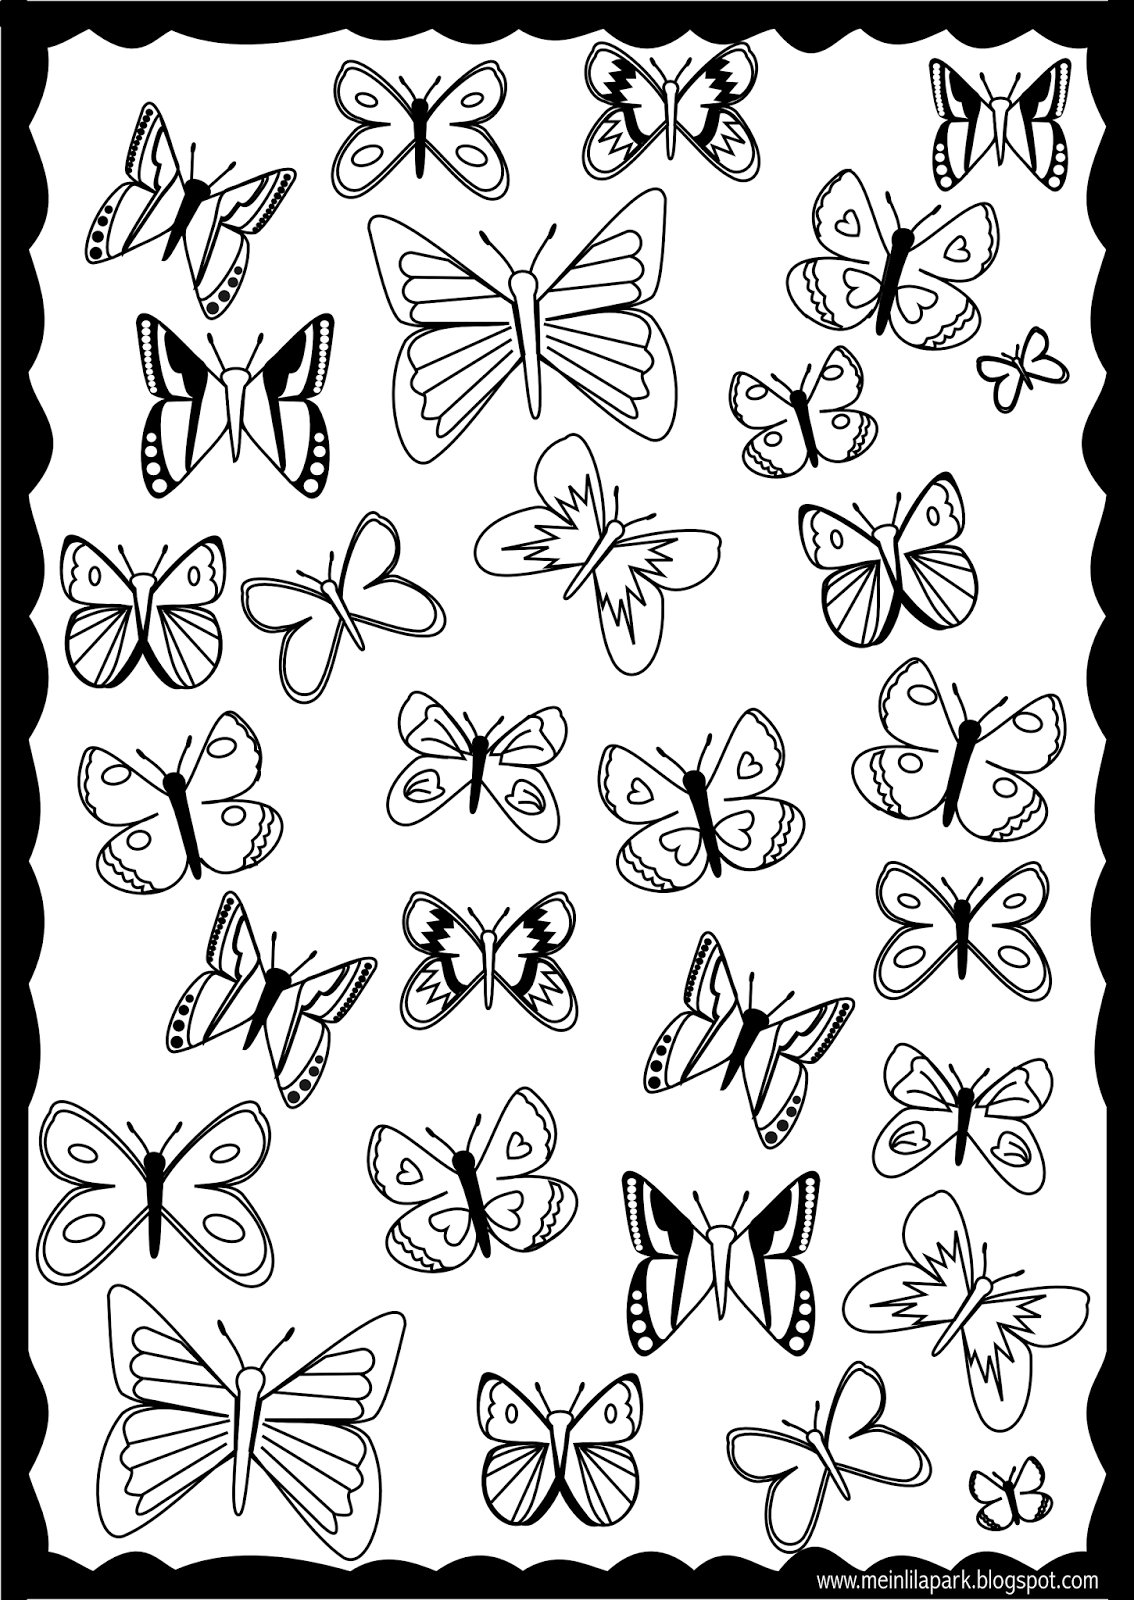 Printable Pictures Of Butterflies Free